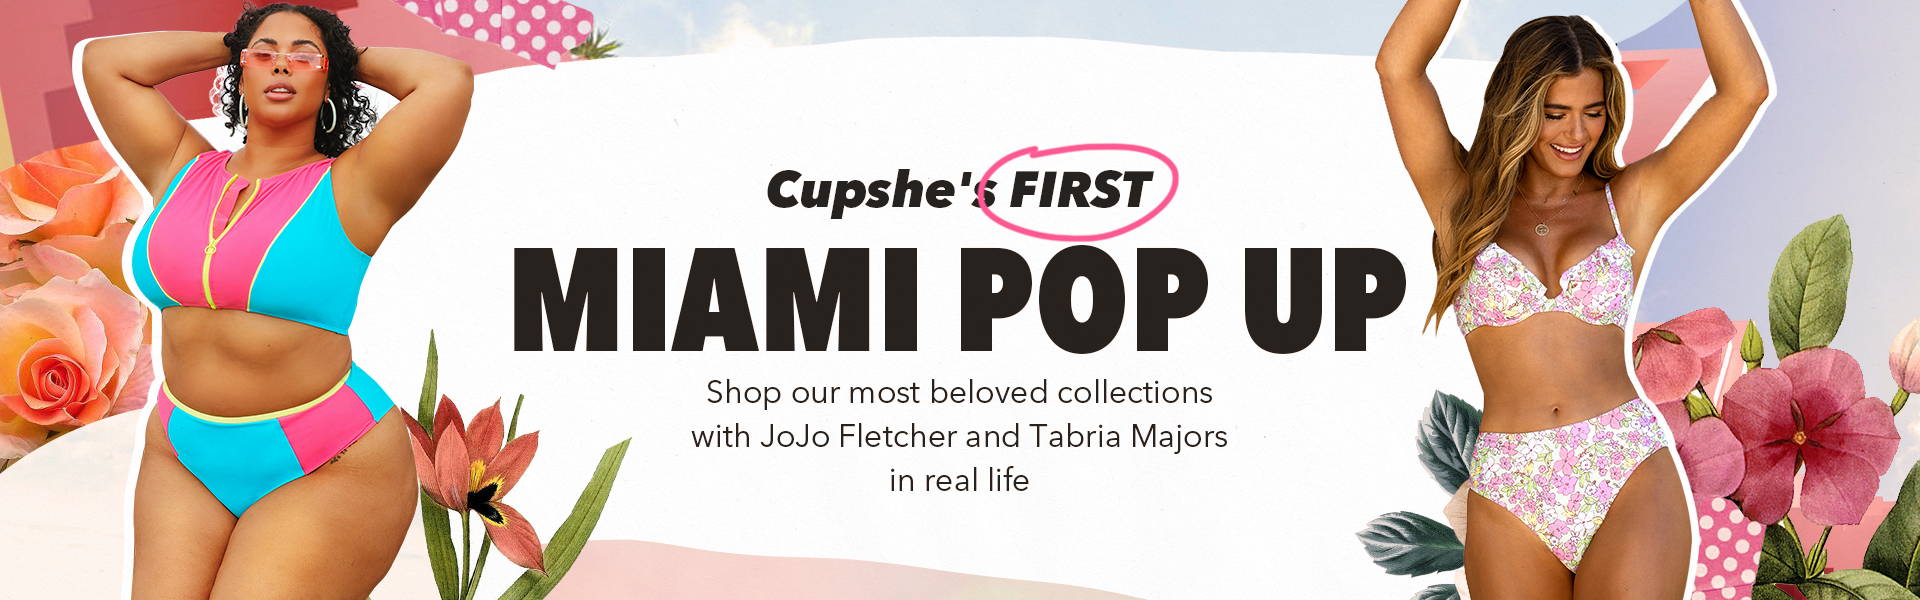 Cupshe Miami Pop Up Store